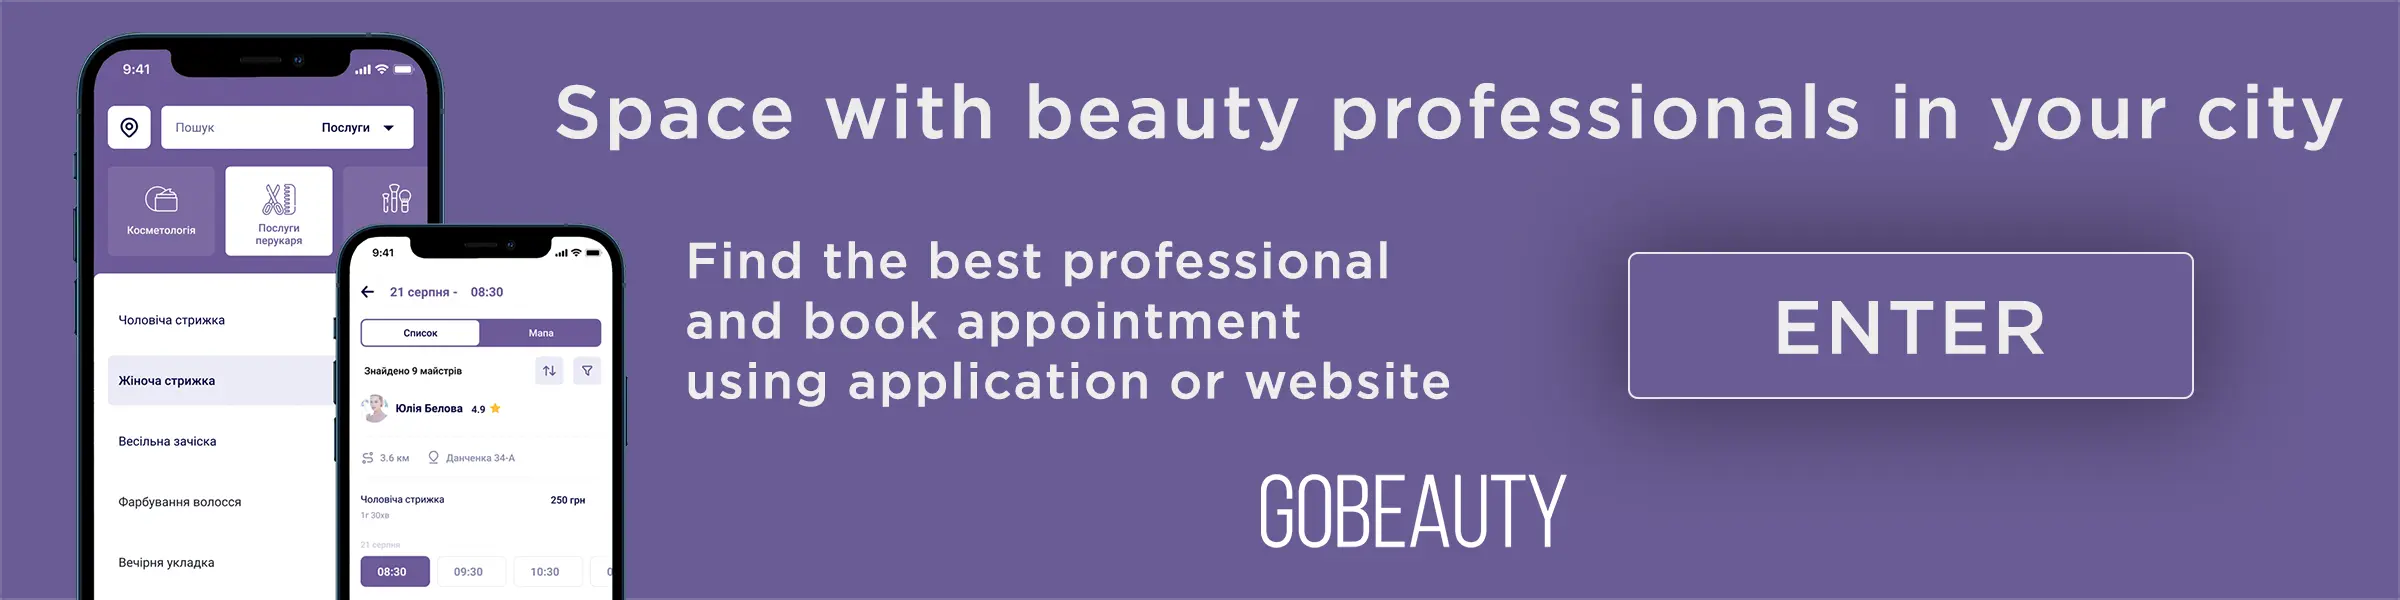 GoBeauty - application for booking appointments with beauty professionals